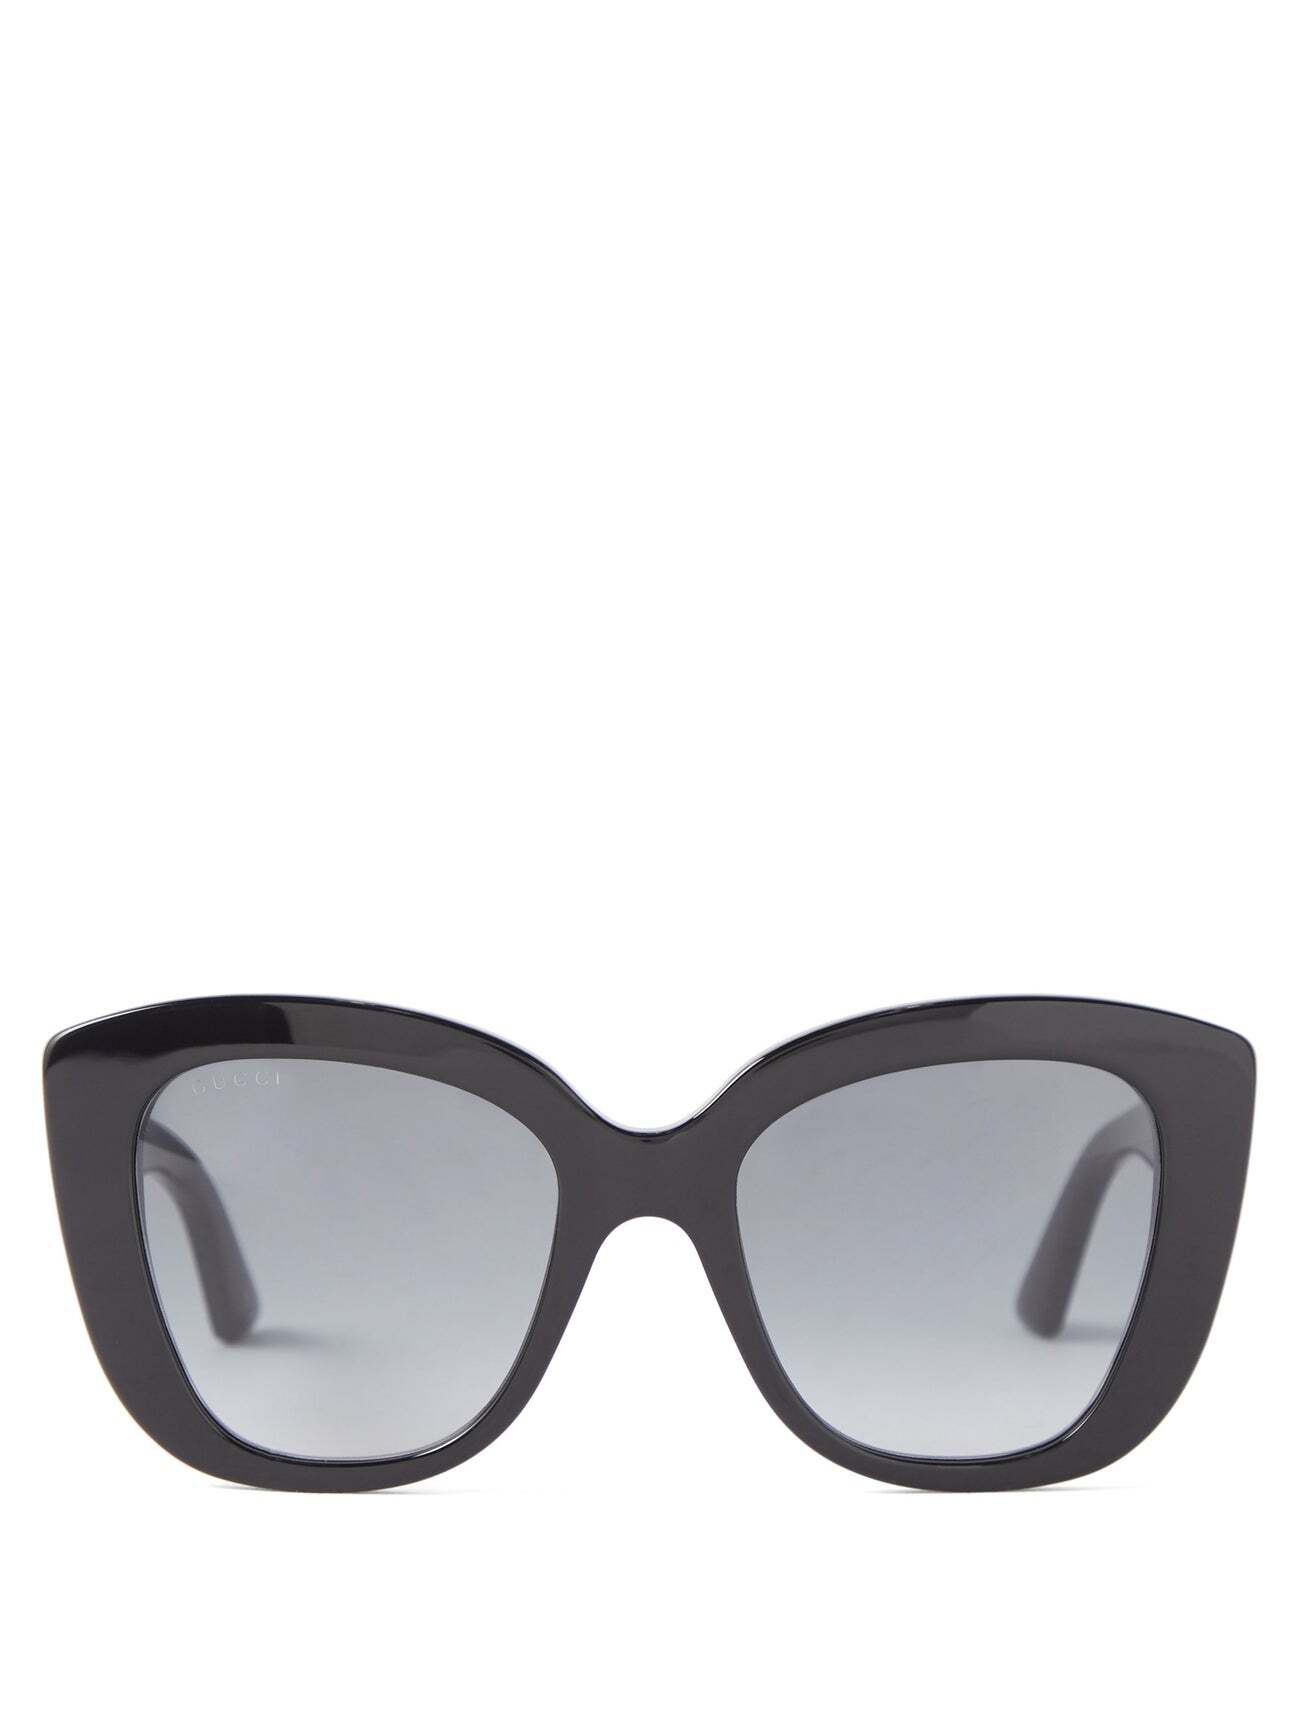 Gucci - Oversized Butterfly-frame Acetate Sunglasses - Womens - Black